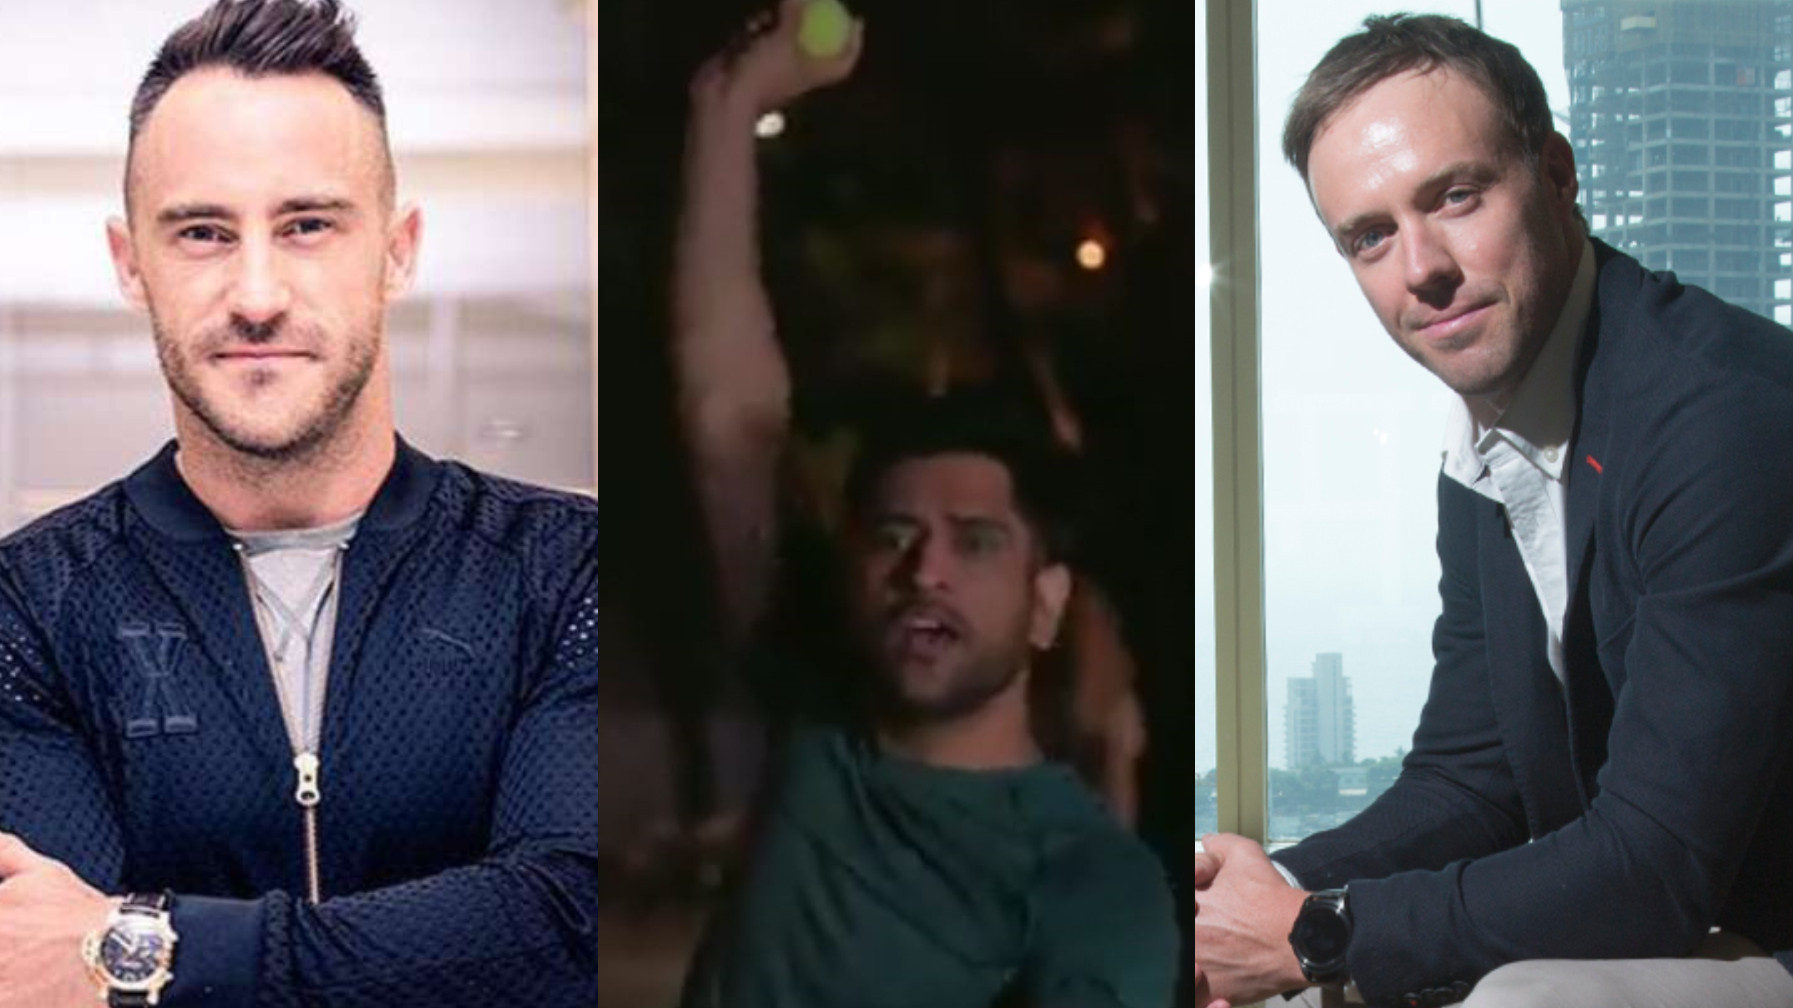 IPL 2021: WATCH- MS Dhoni’s street cricket video leads to Du Plessis and De Villiers wondering about his new role